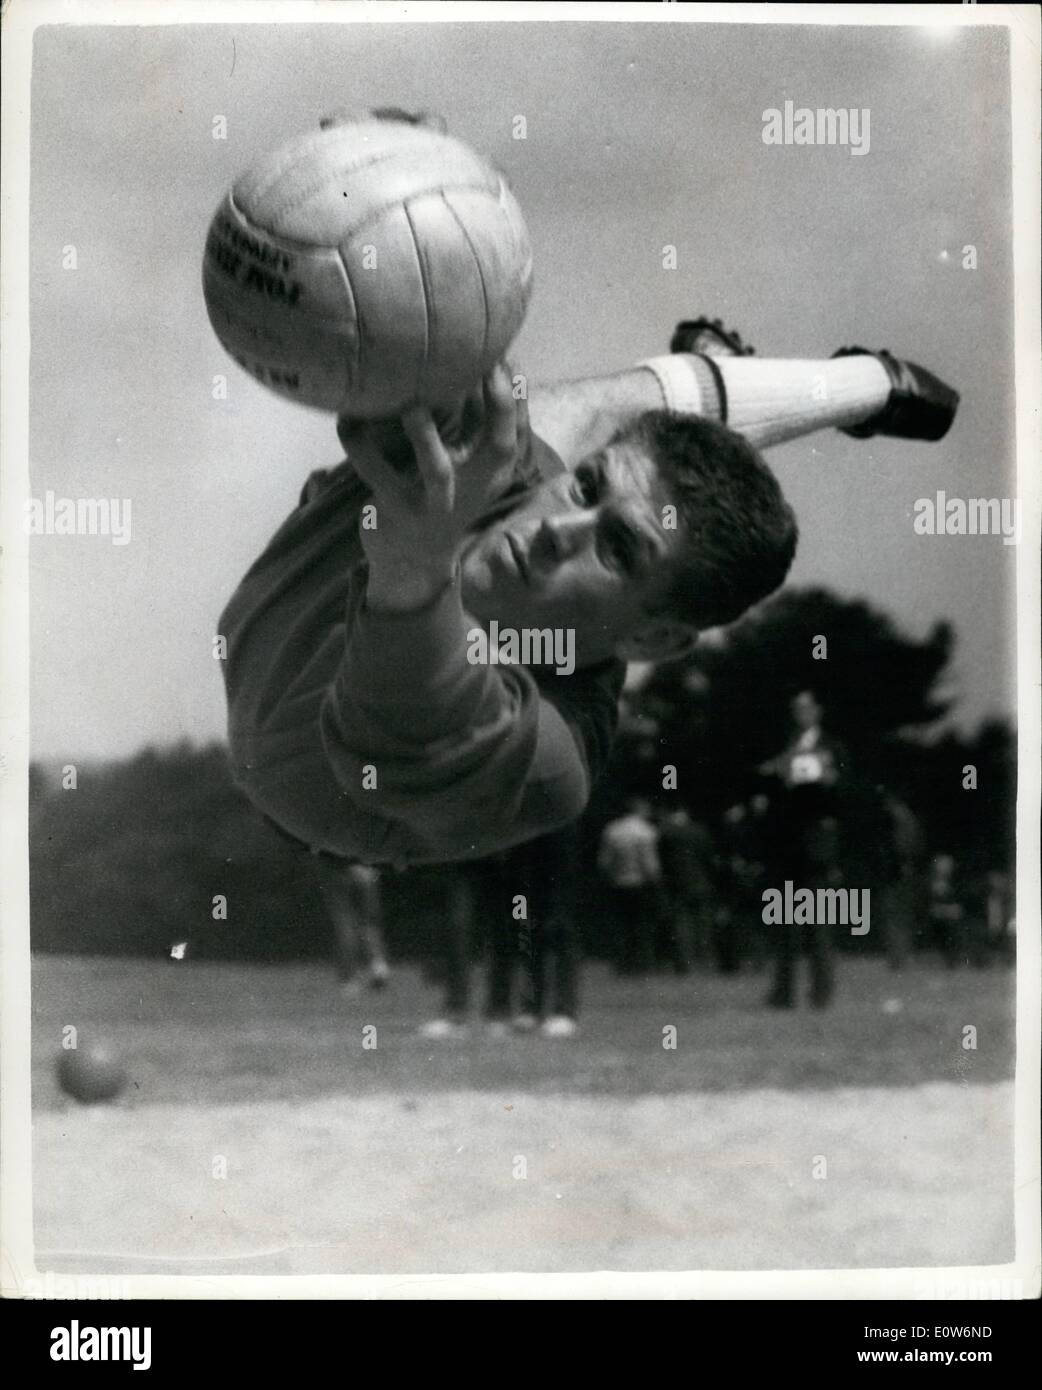 Aug. 08, 1961 - West Ham players in training : members of the West Ham Football Club were to be seen in training for the new season at Grange Farm, Chigwell, today. photo shows Lawrie Leslie, the new Scot goalkeeper, in action this morning at the training session. Stock Photo